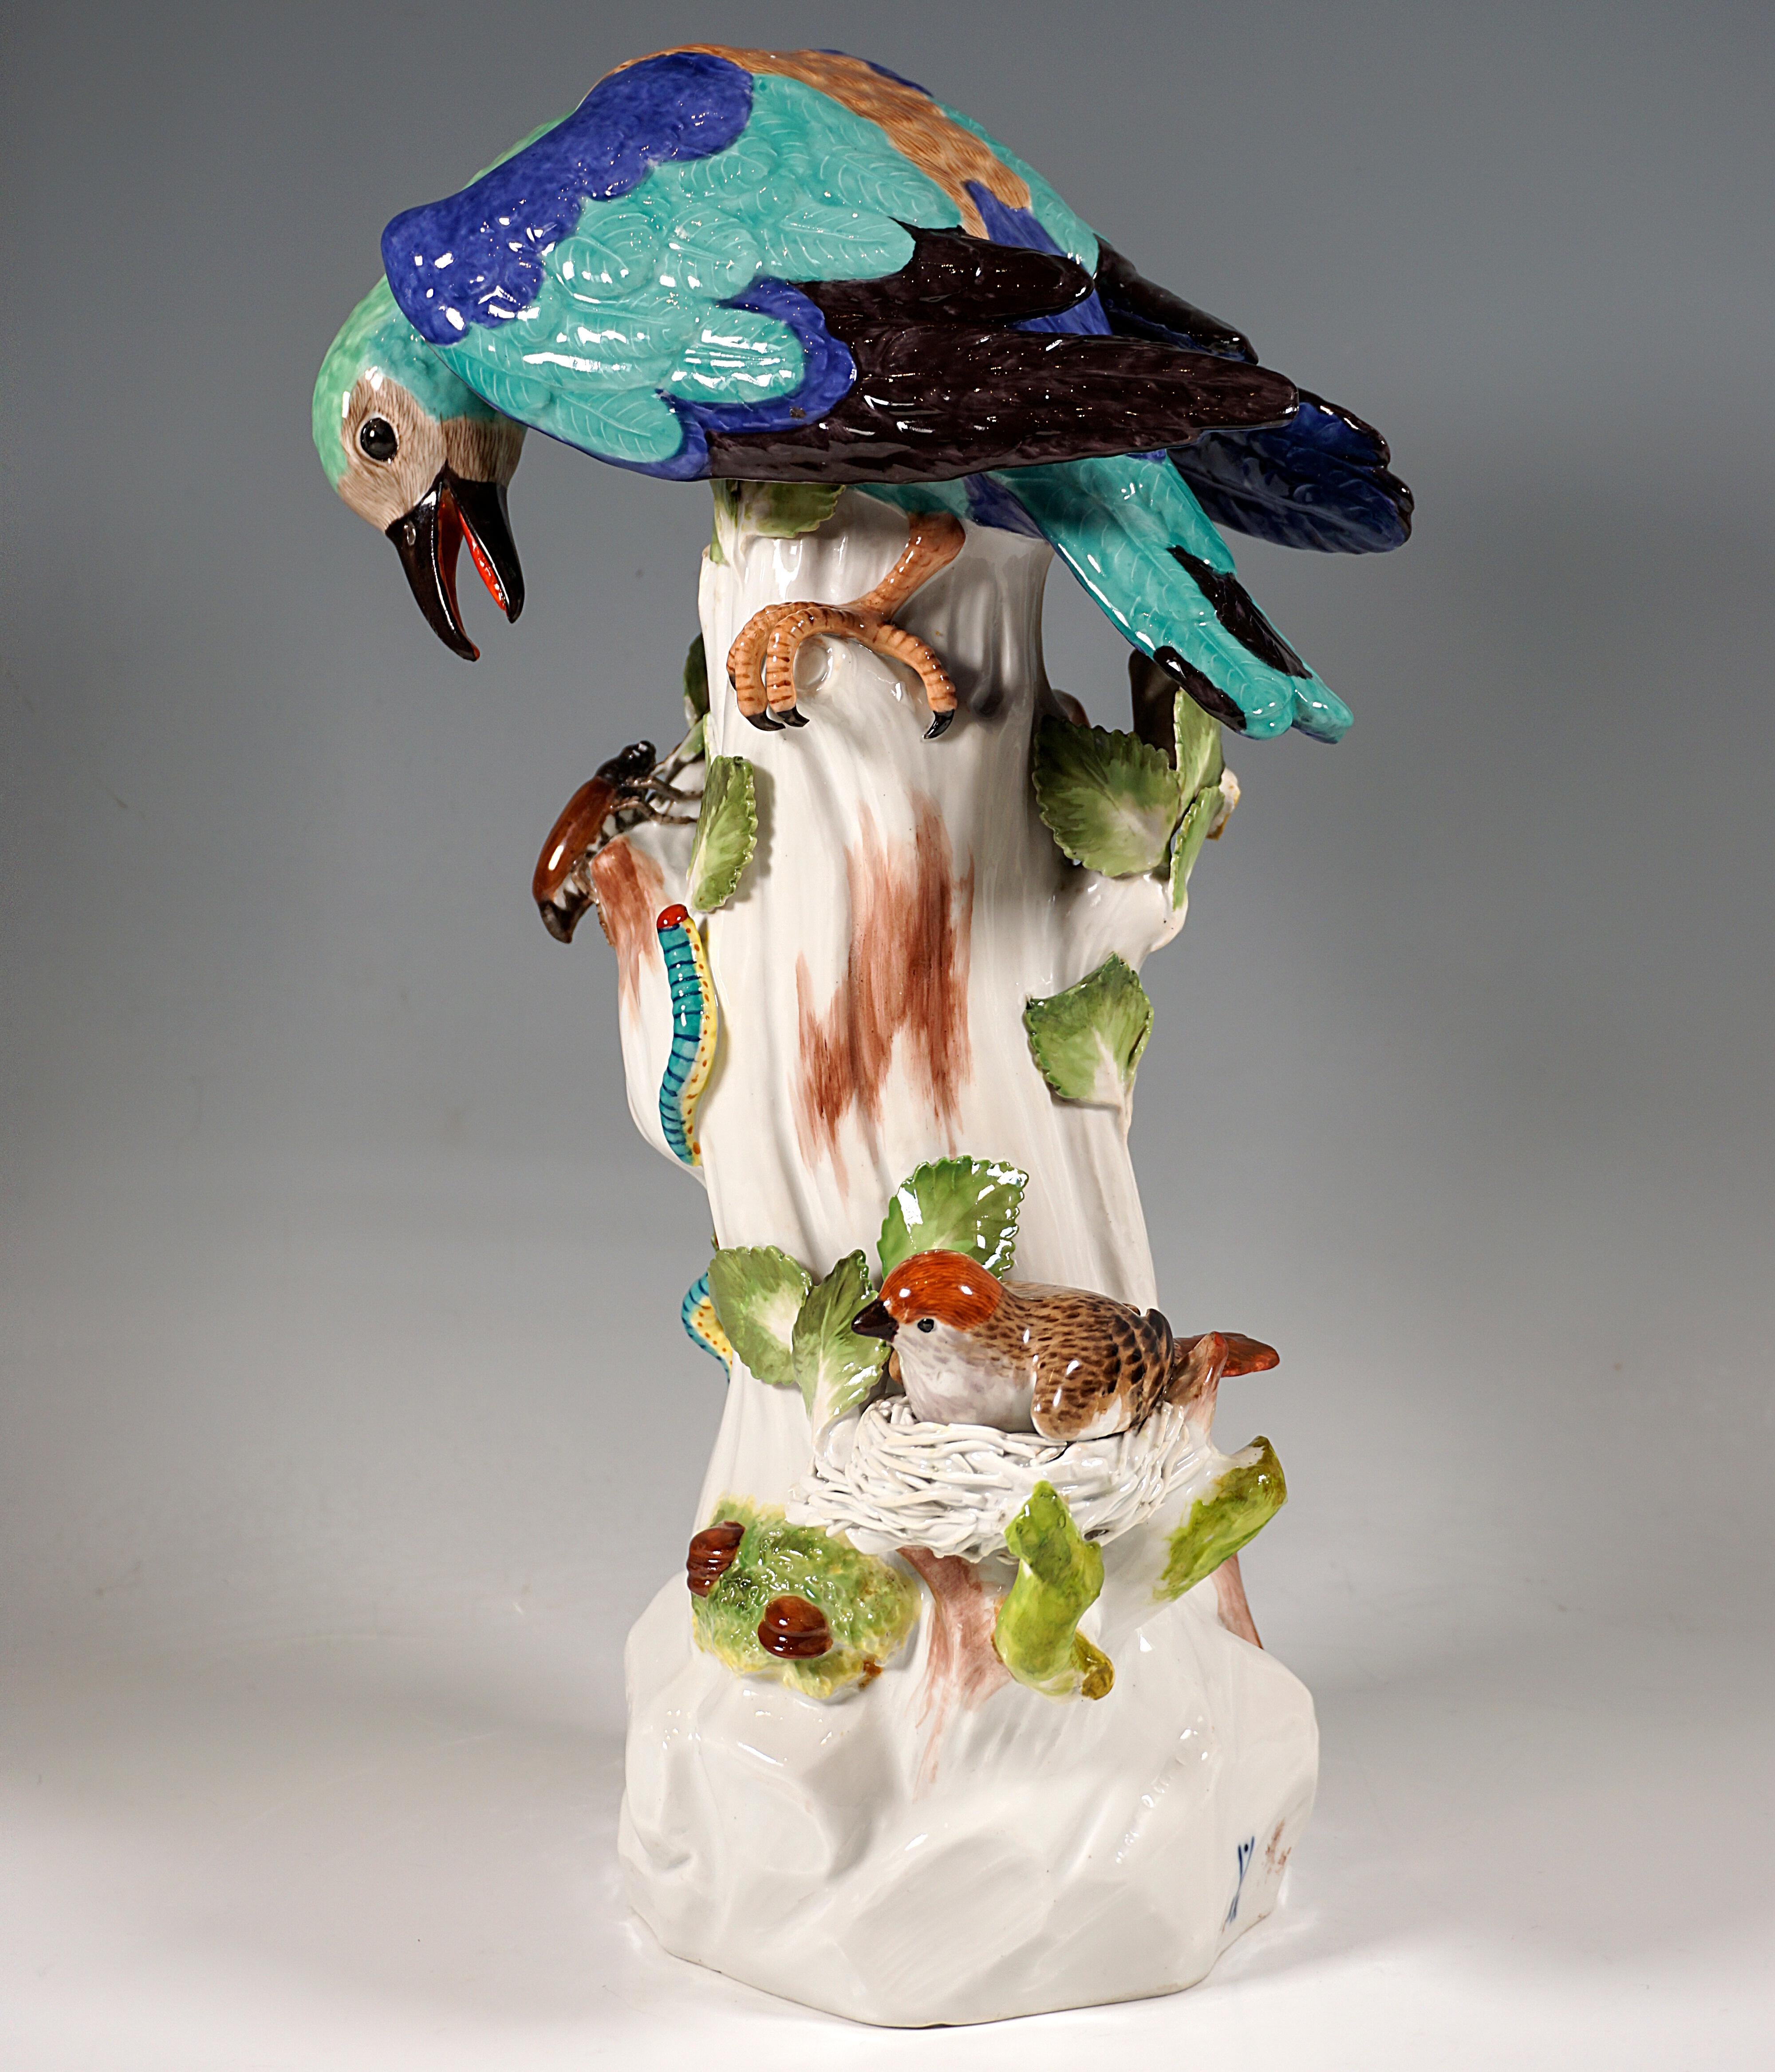 Very elaborate and lovingly designed group of animal figures:
European roller leaning forward, also known as almond crow in German-speaking countries, sitting on a tree trunk with open beak, below the bird a large beetle and caterpillars, its prime